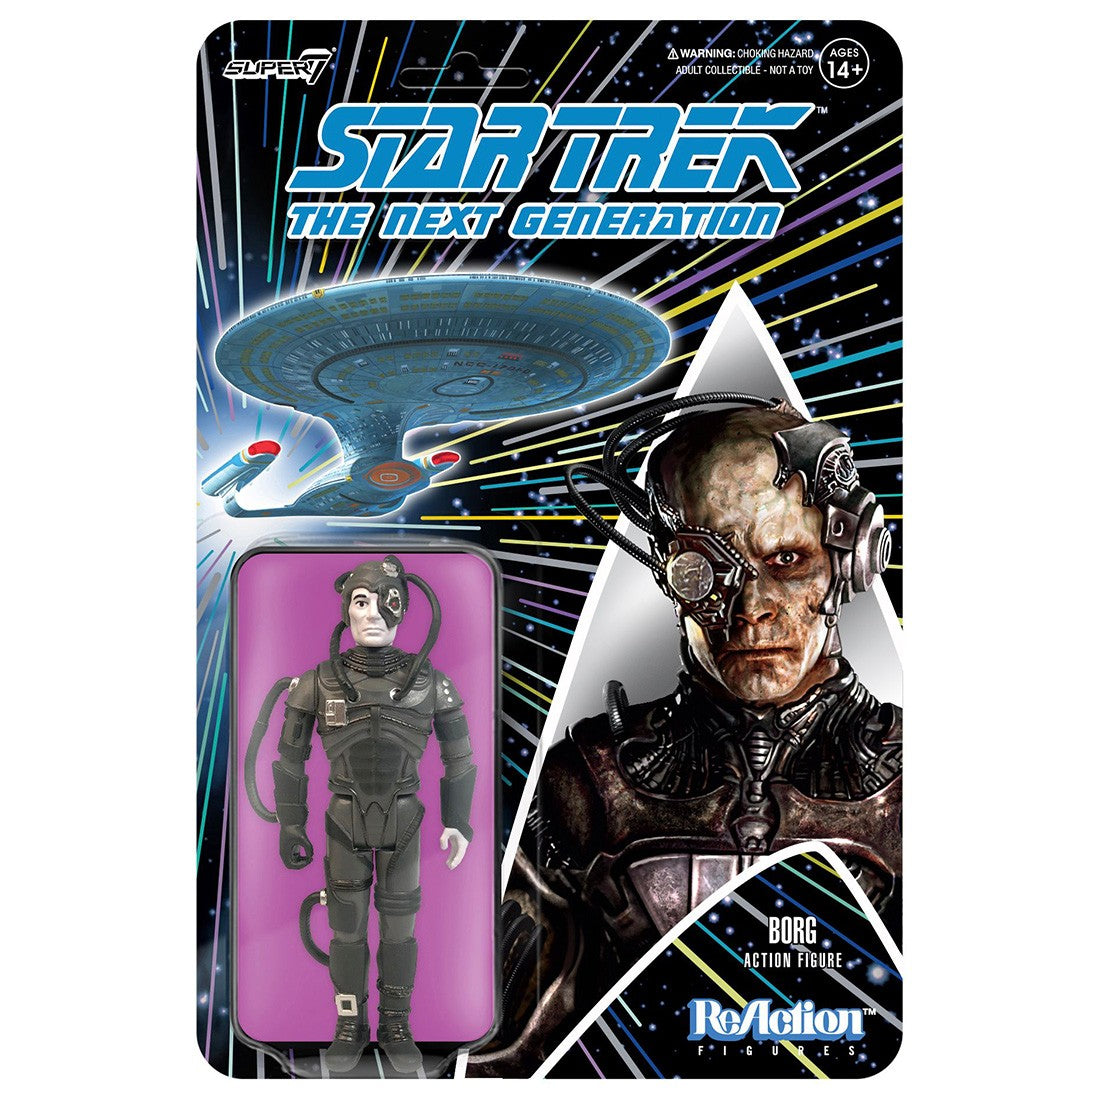 Borg - Star Trek: The Next Generation by Super7 *PUNCHED